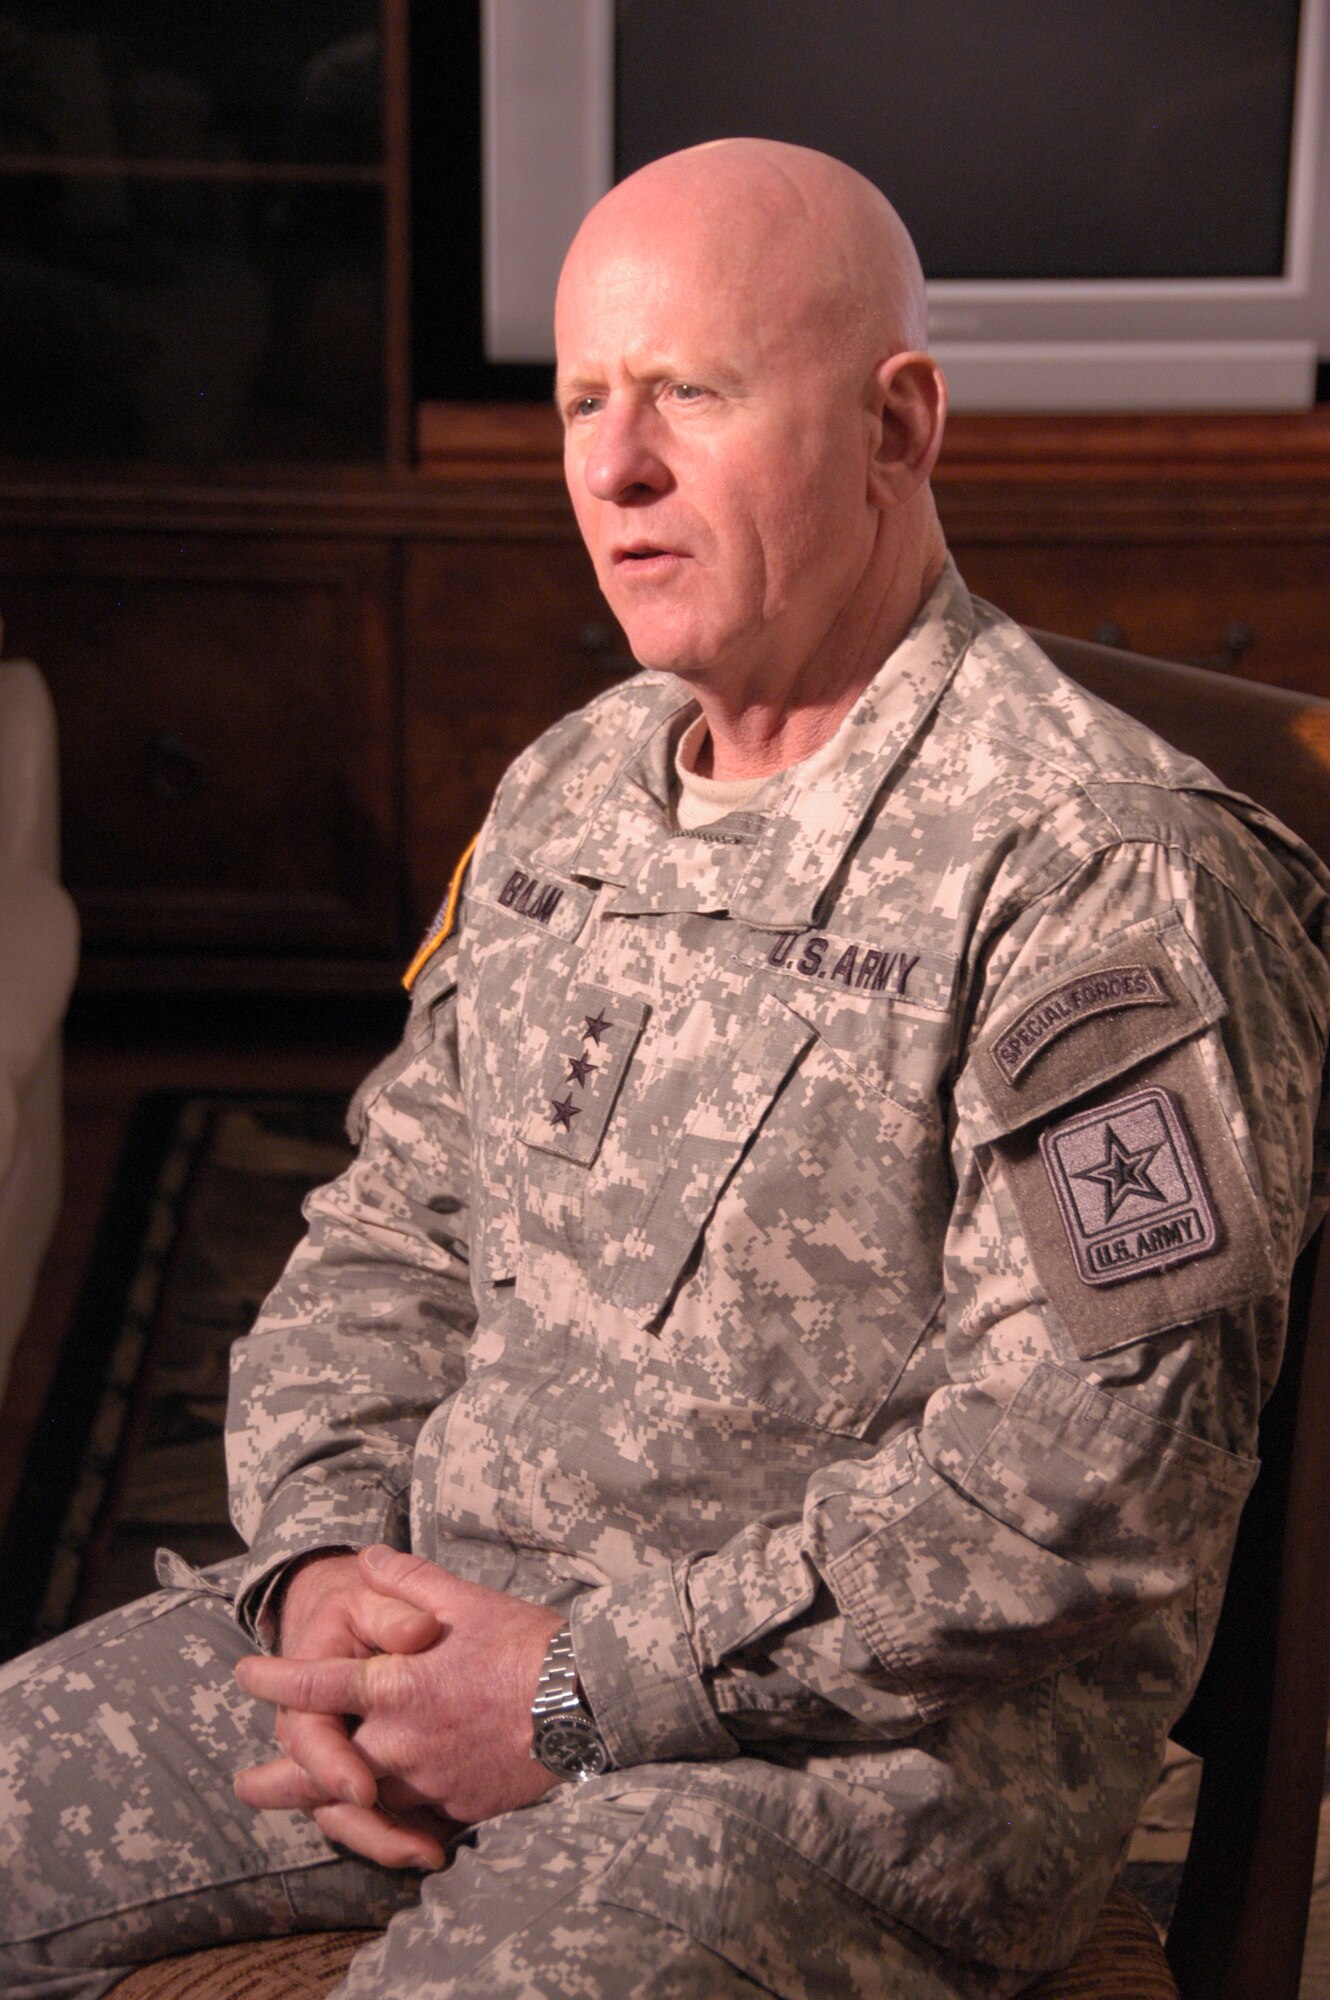 LTG H Steven Blum, Chief of Guard Bureau gives an interview during his visit to Tyndall on Feb 12.